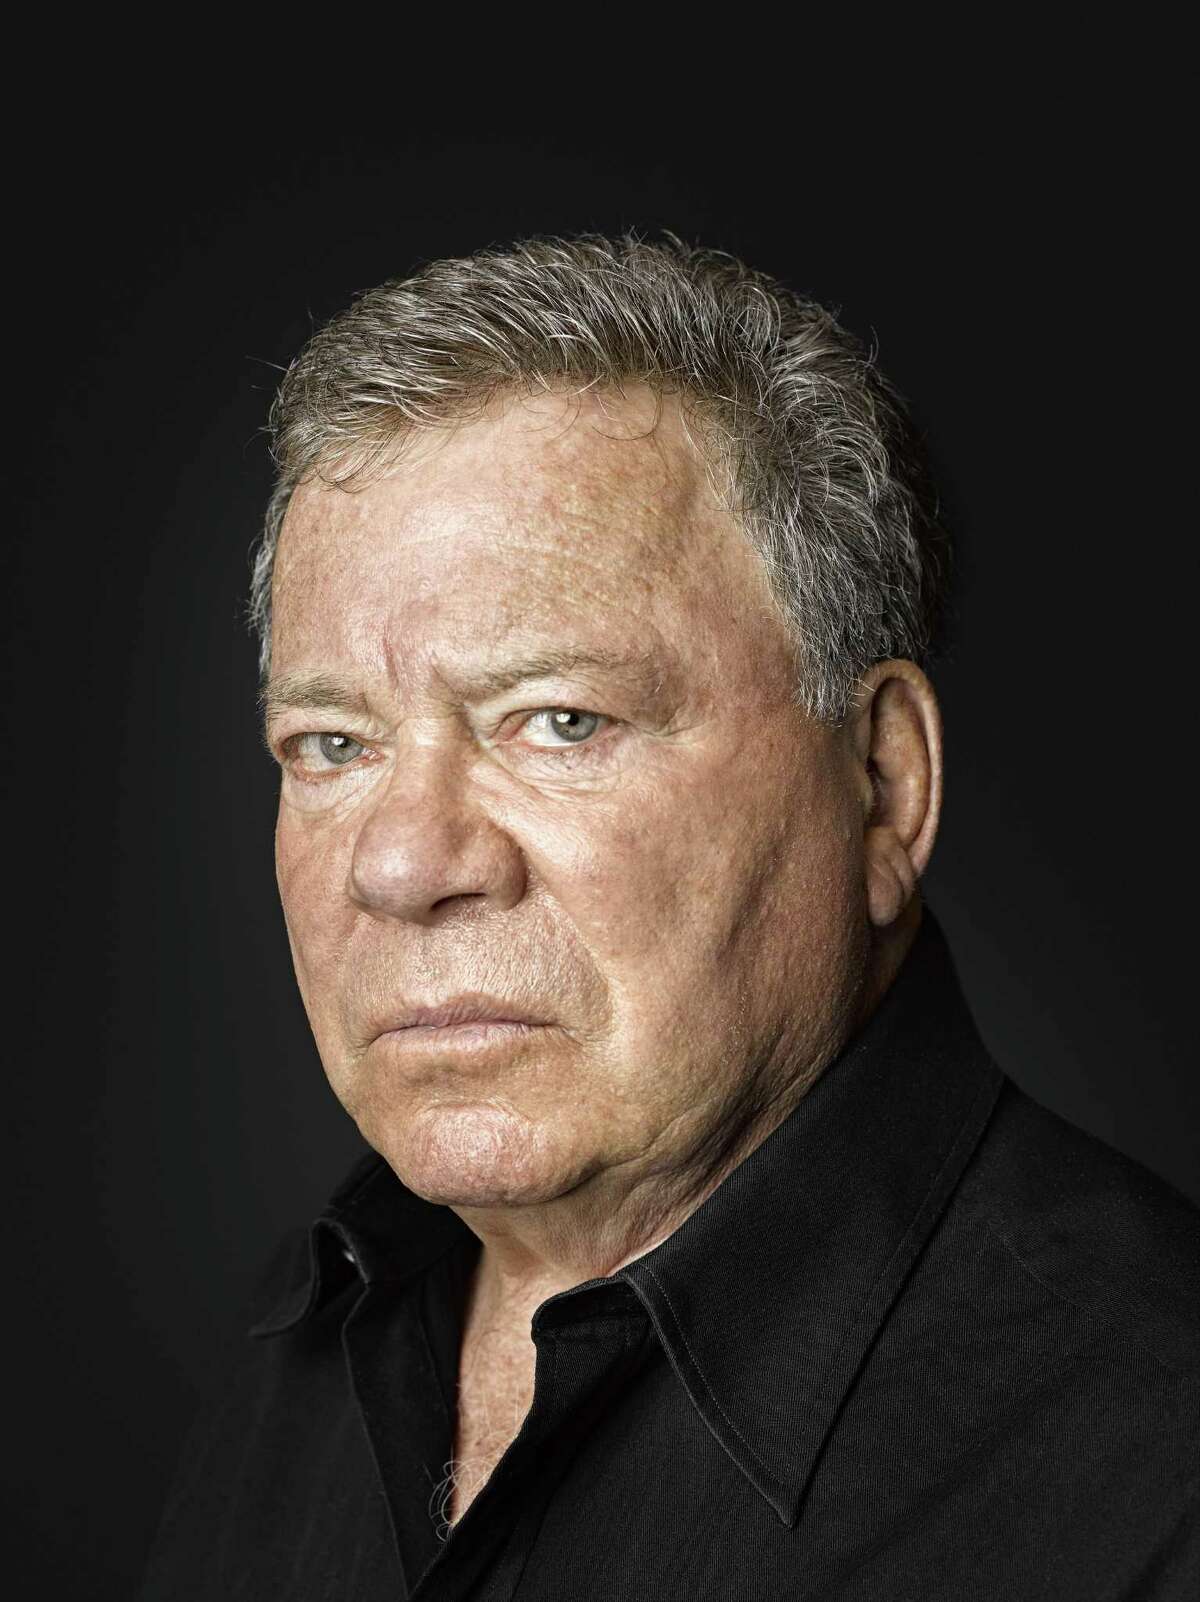 William Shatner from "Star Trek: Original TV Series" will appear at the Celebrity Fan Fest from Friday, June 12 to Saturday, June 13.